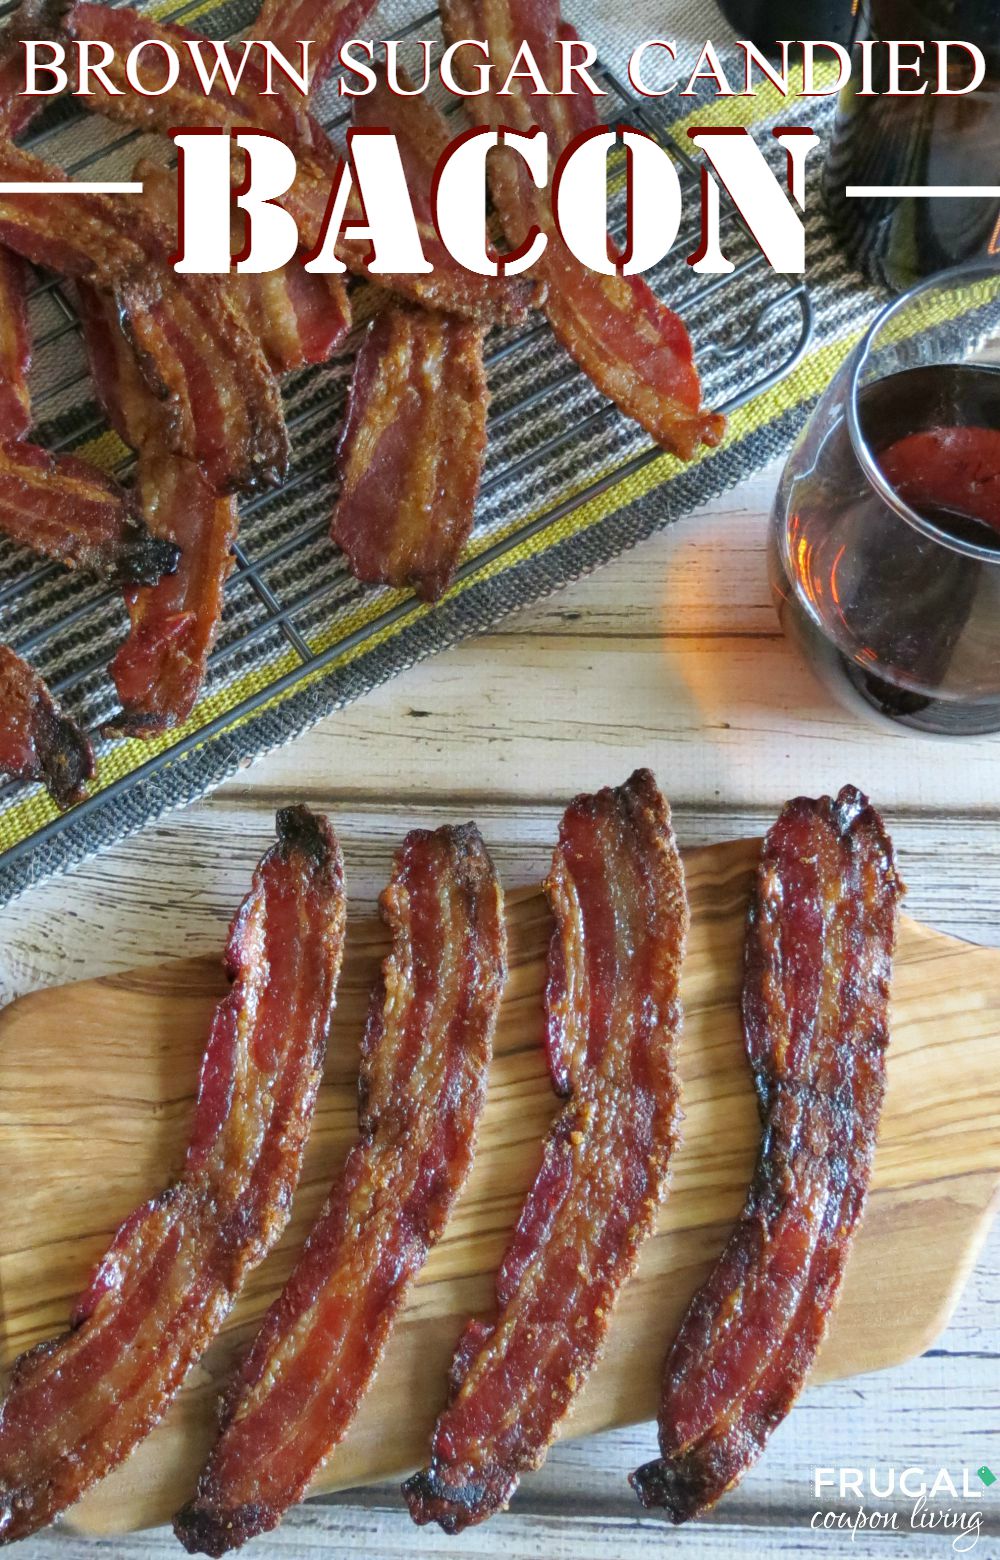 candied-bacon-large-frugal-coupon-living-title